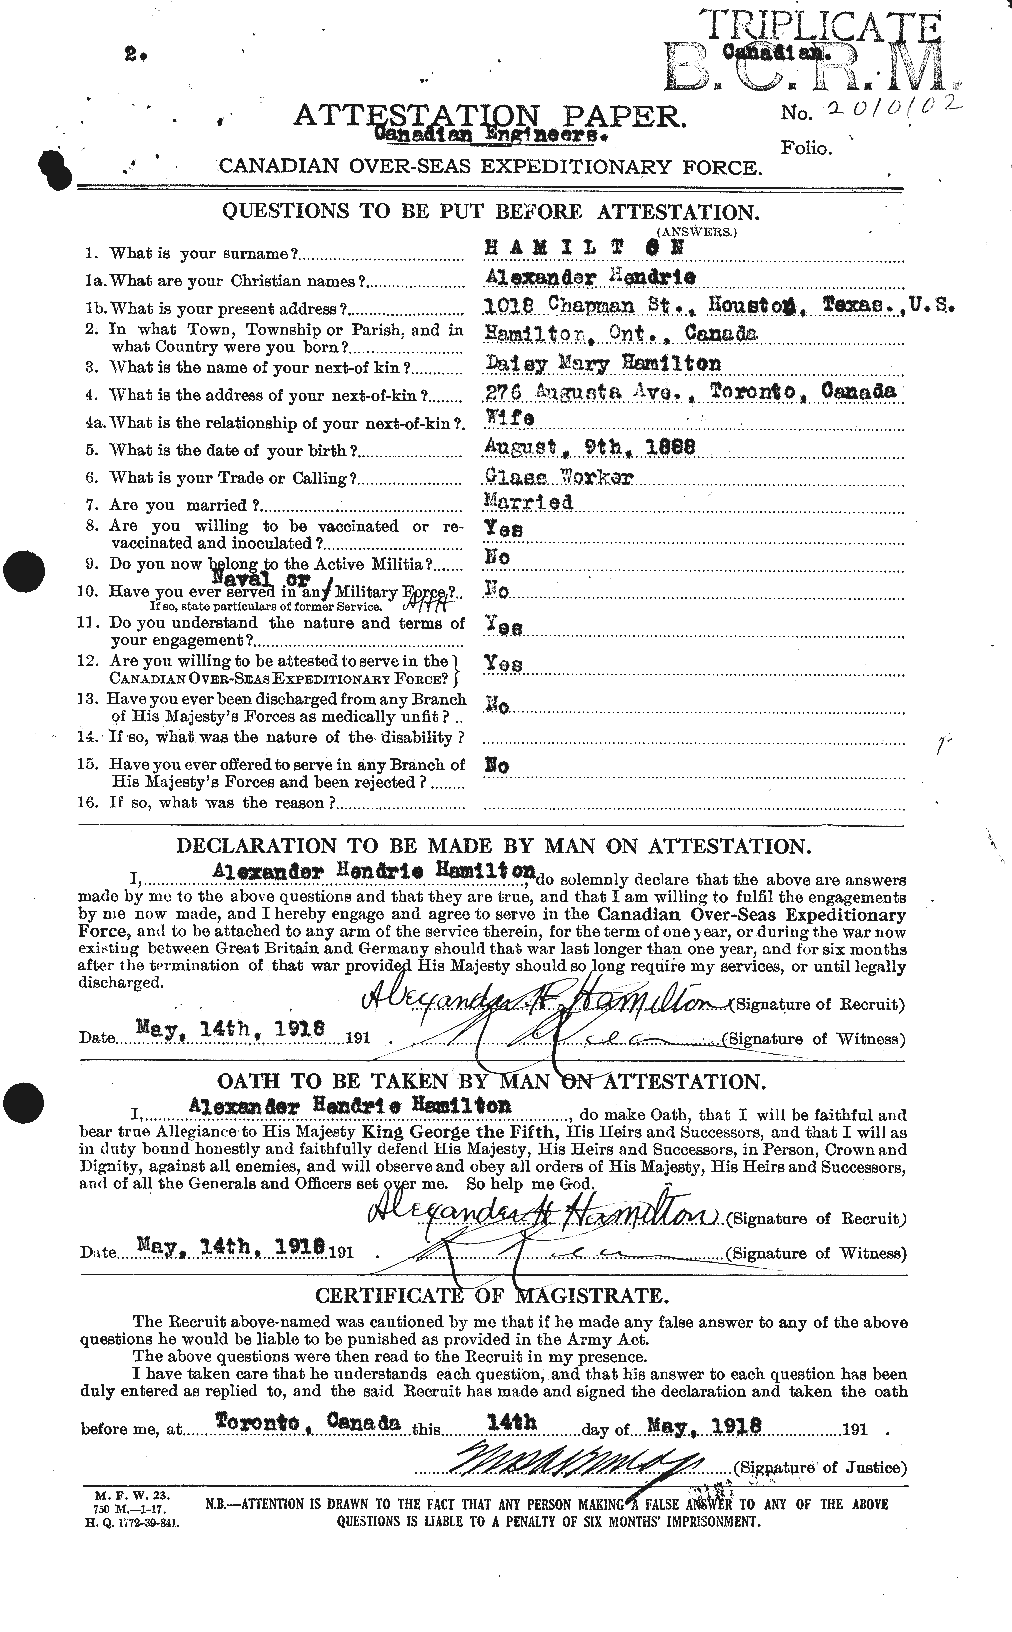 Personnel Records of the First World War - CEF 375203a